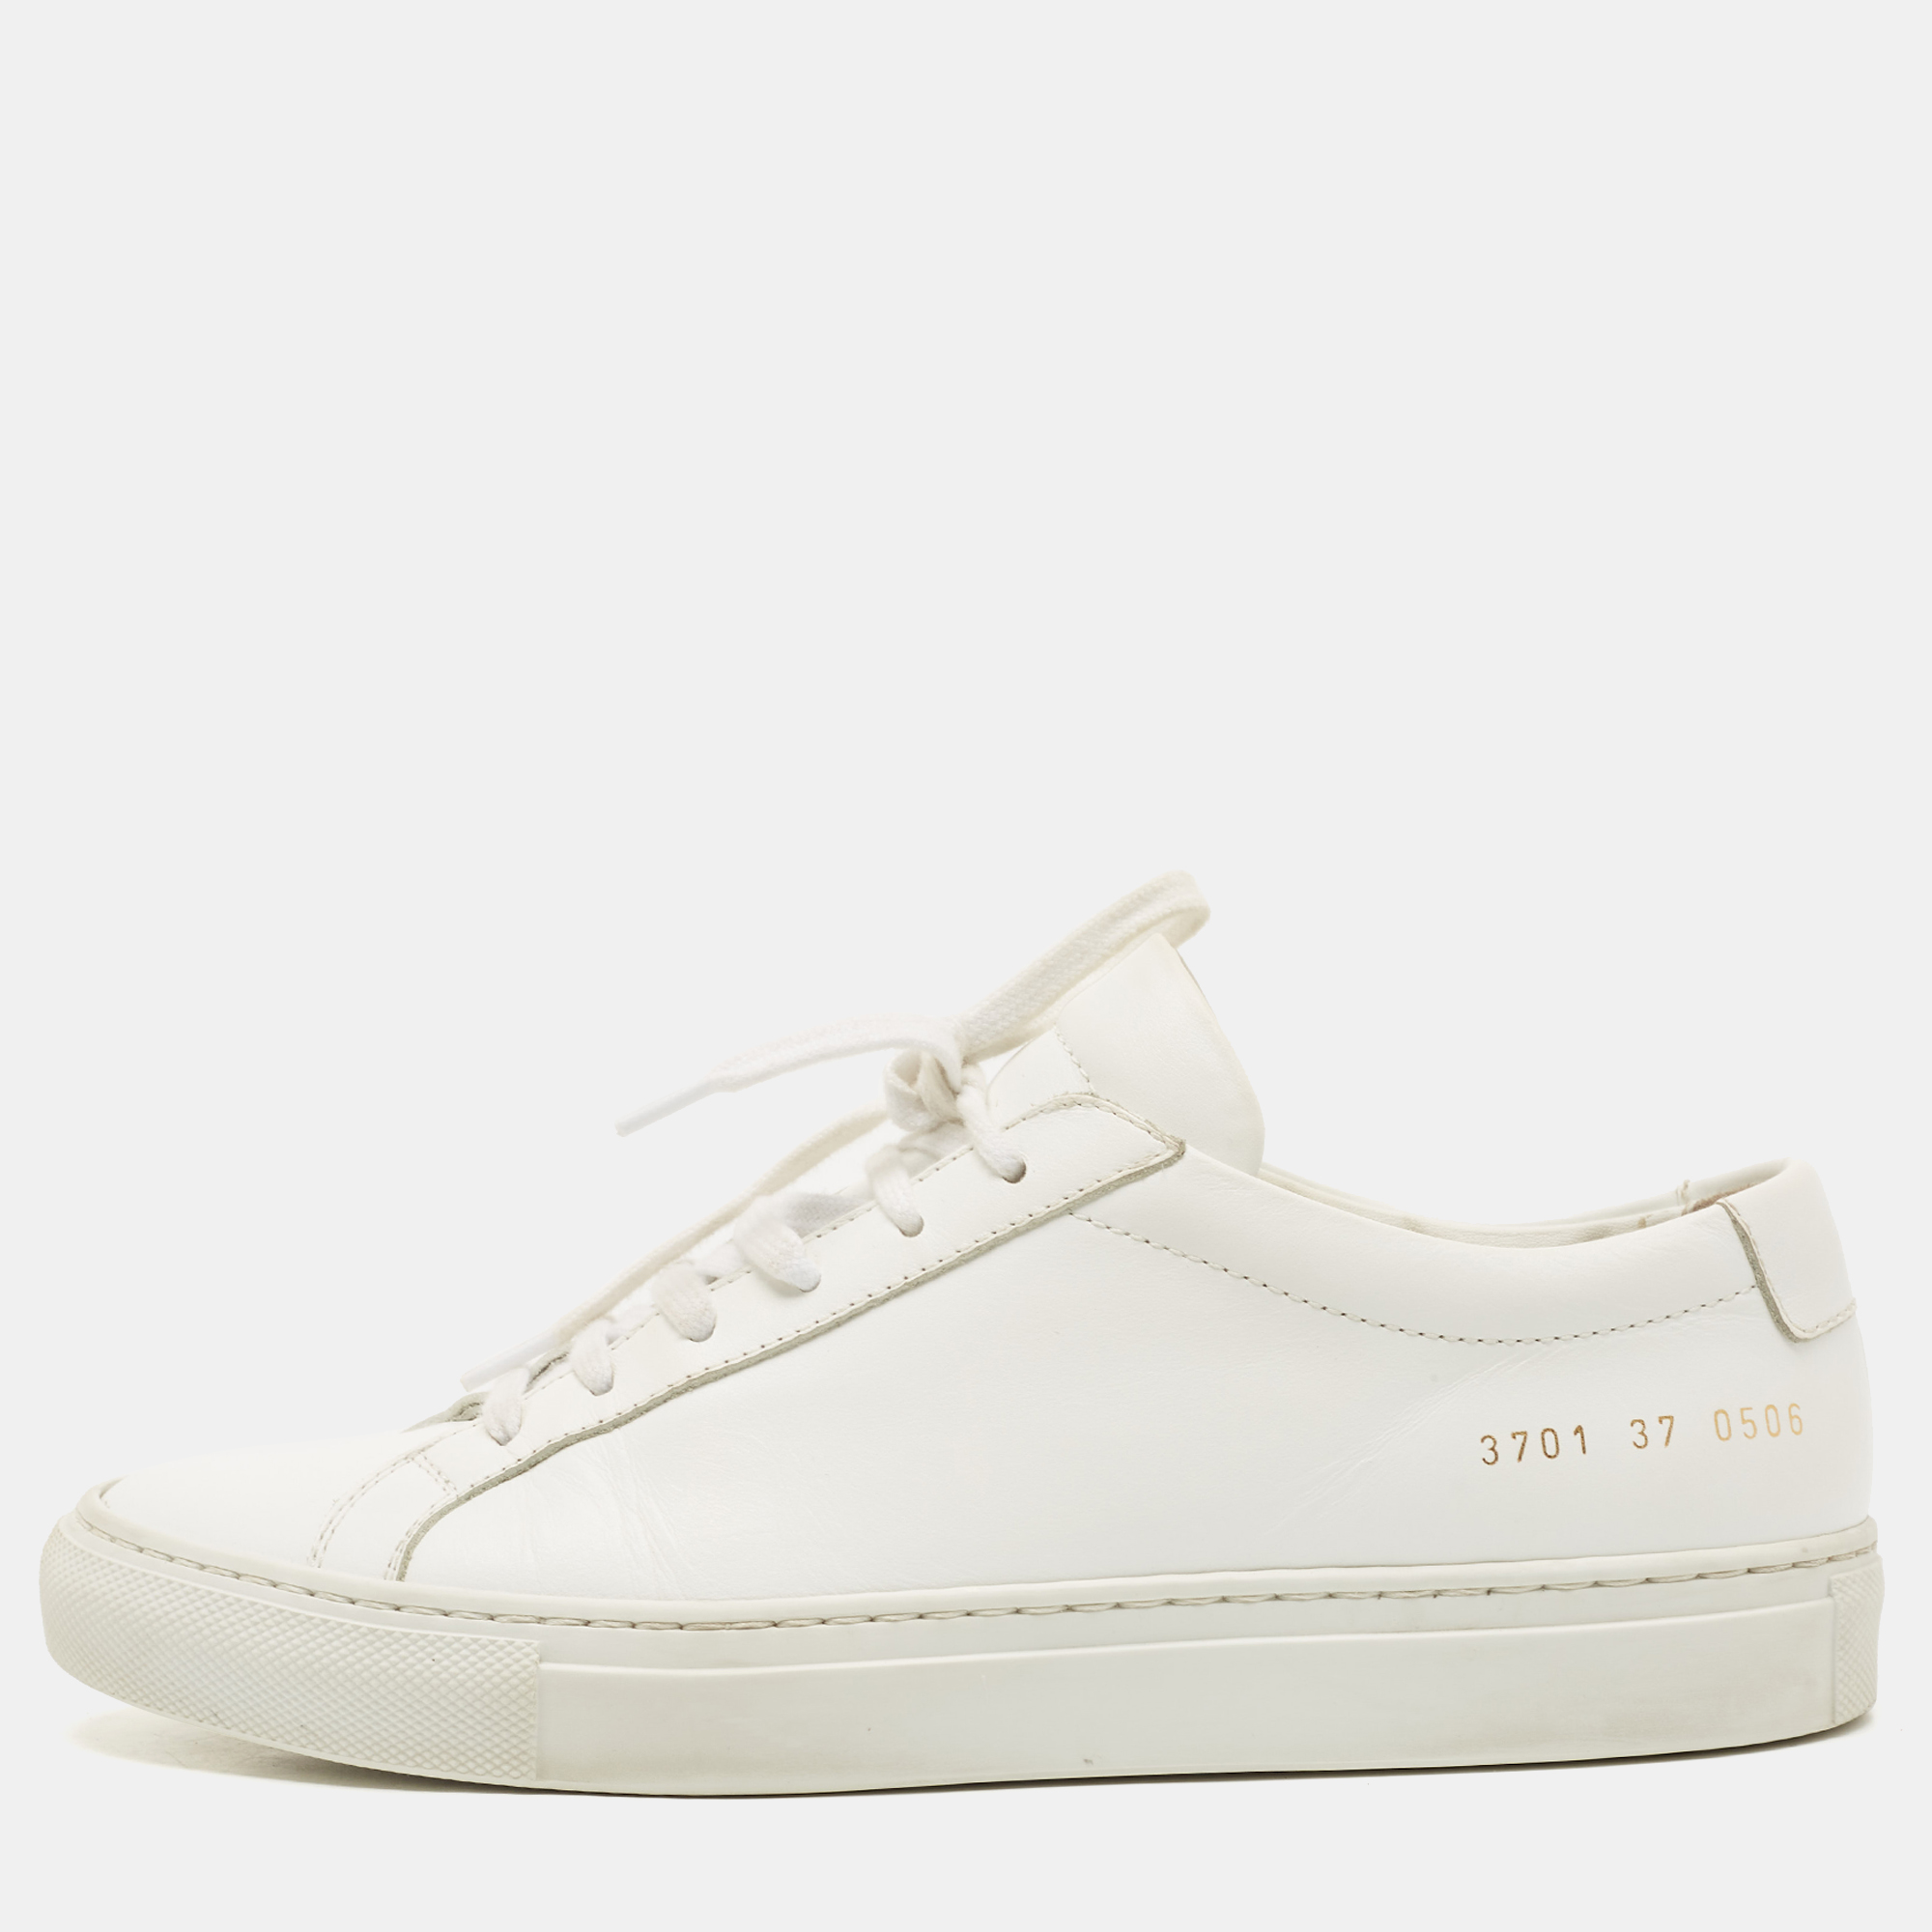 Common Projects White Leather Achilles Sneakers Size 37